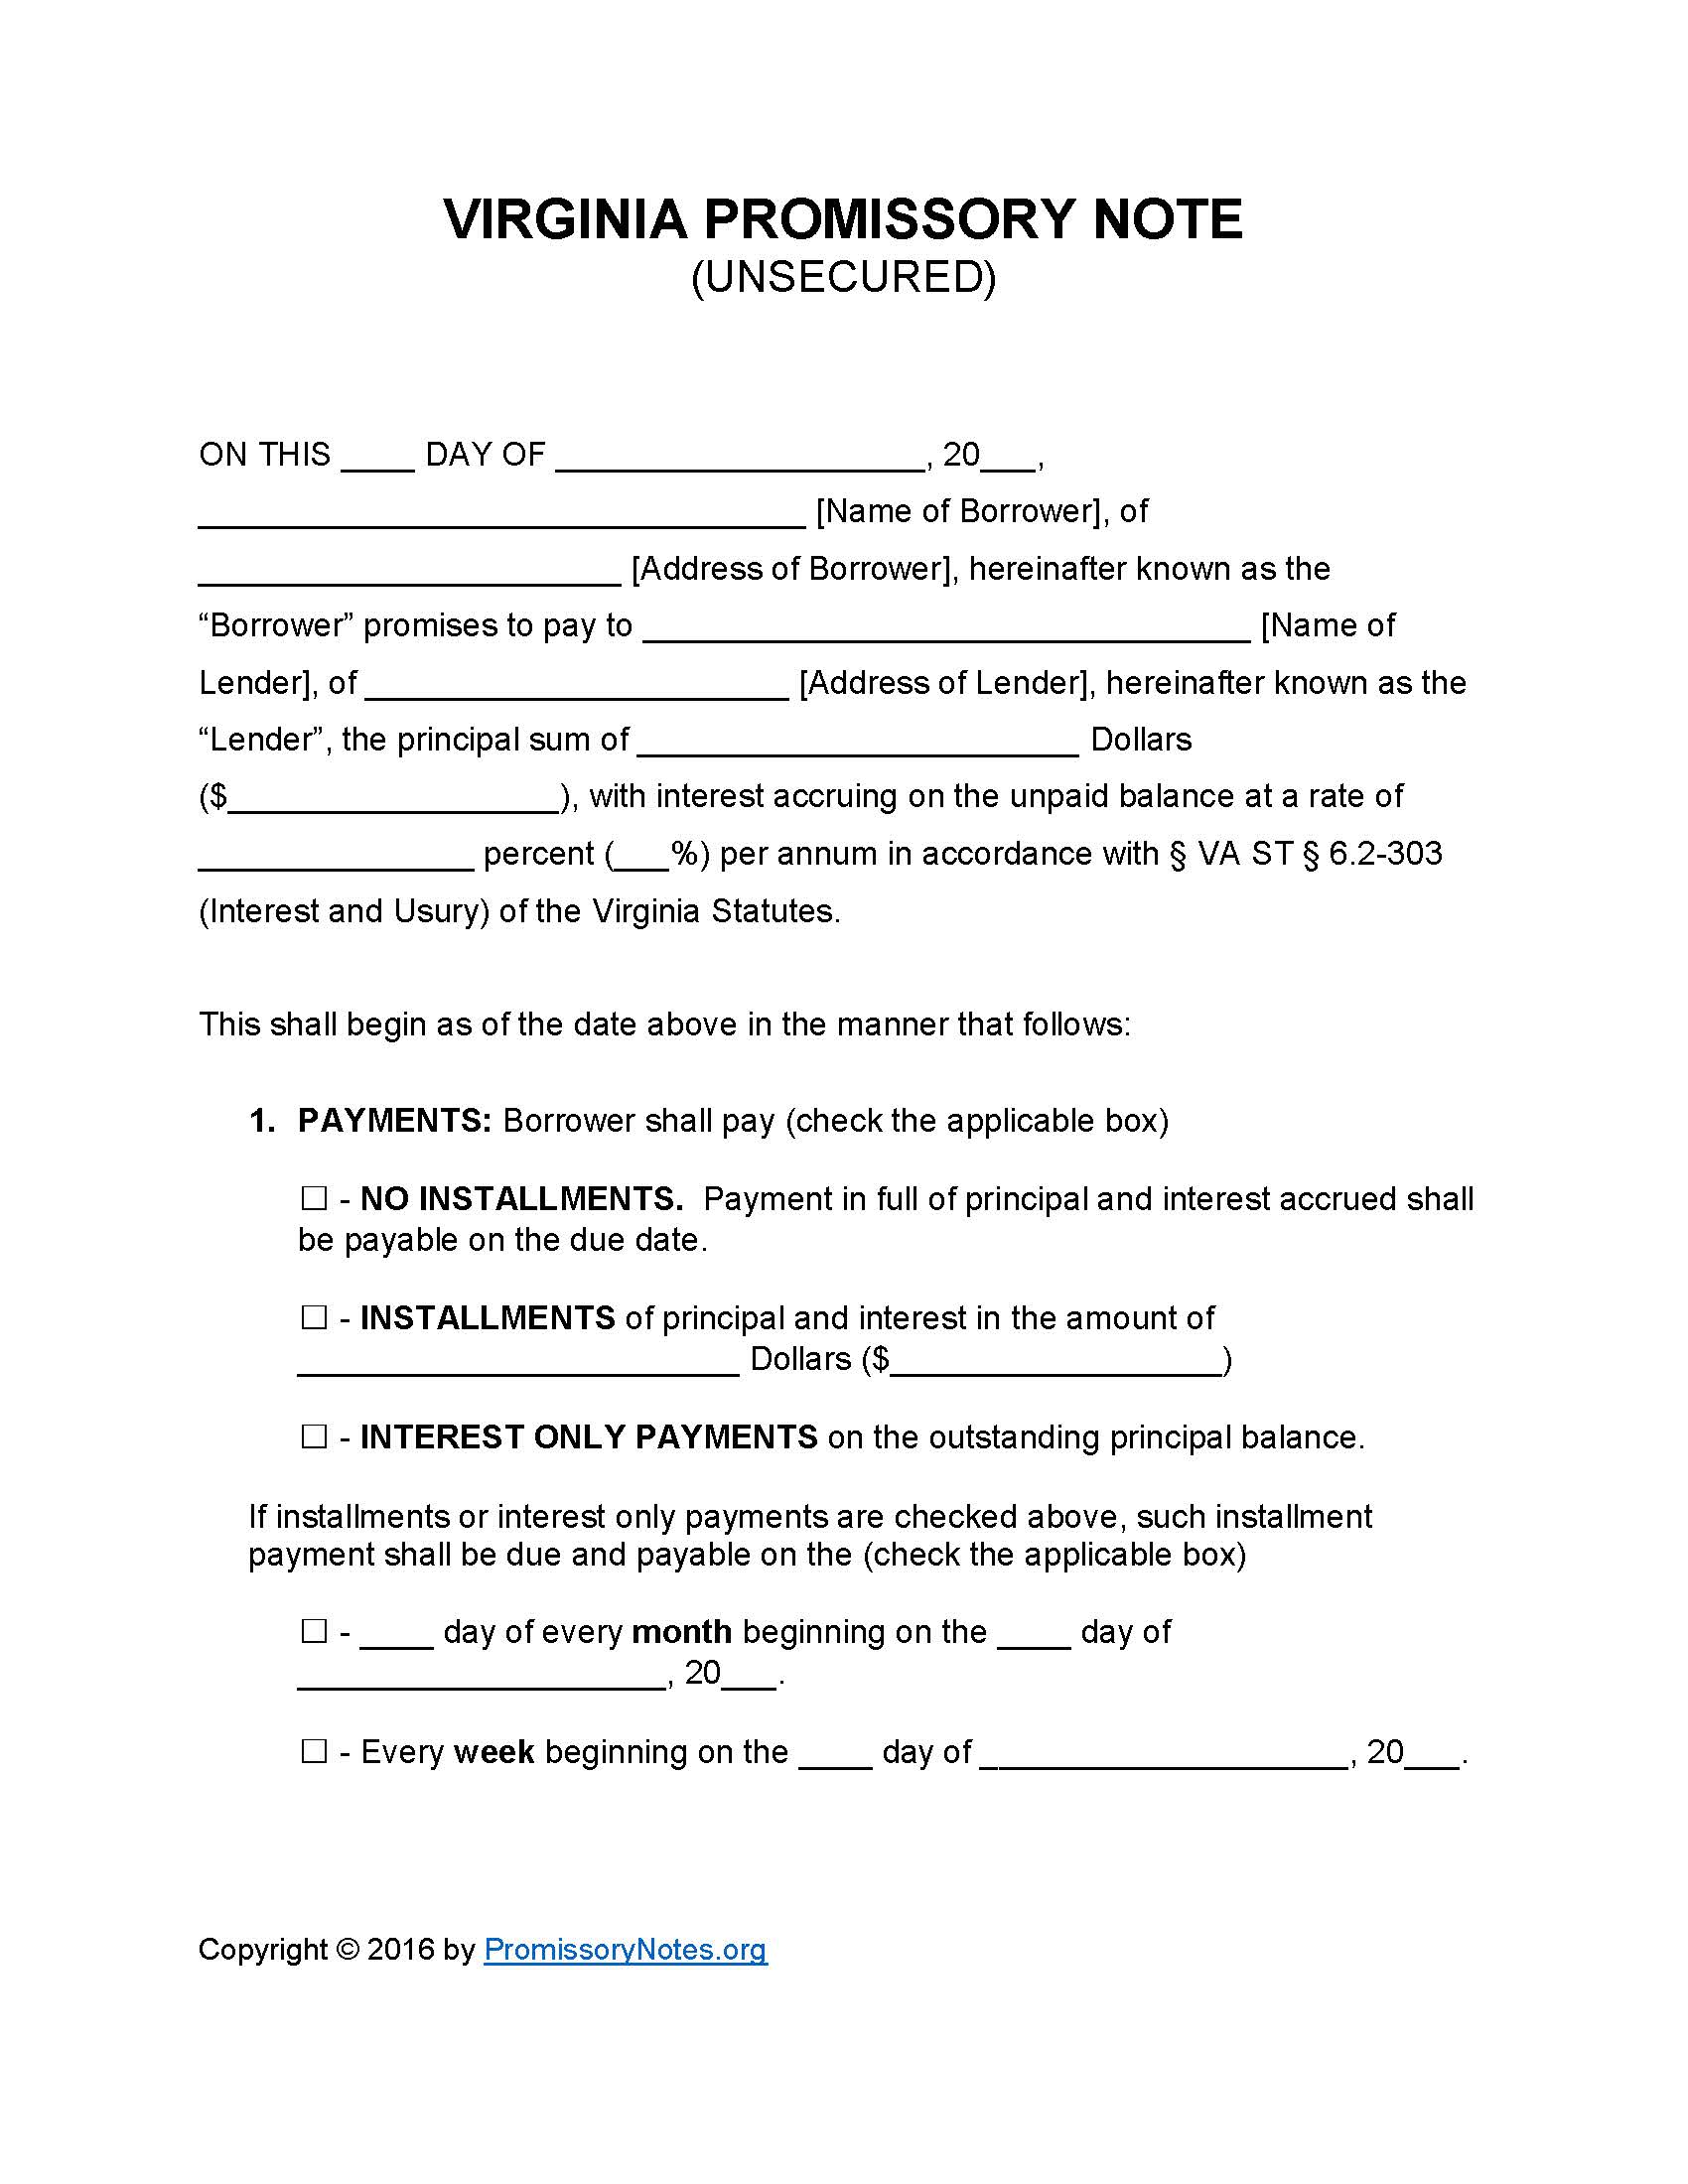 virginia-unsecured-promissory-note-form